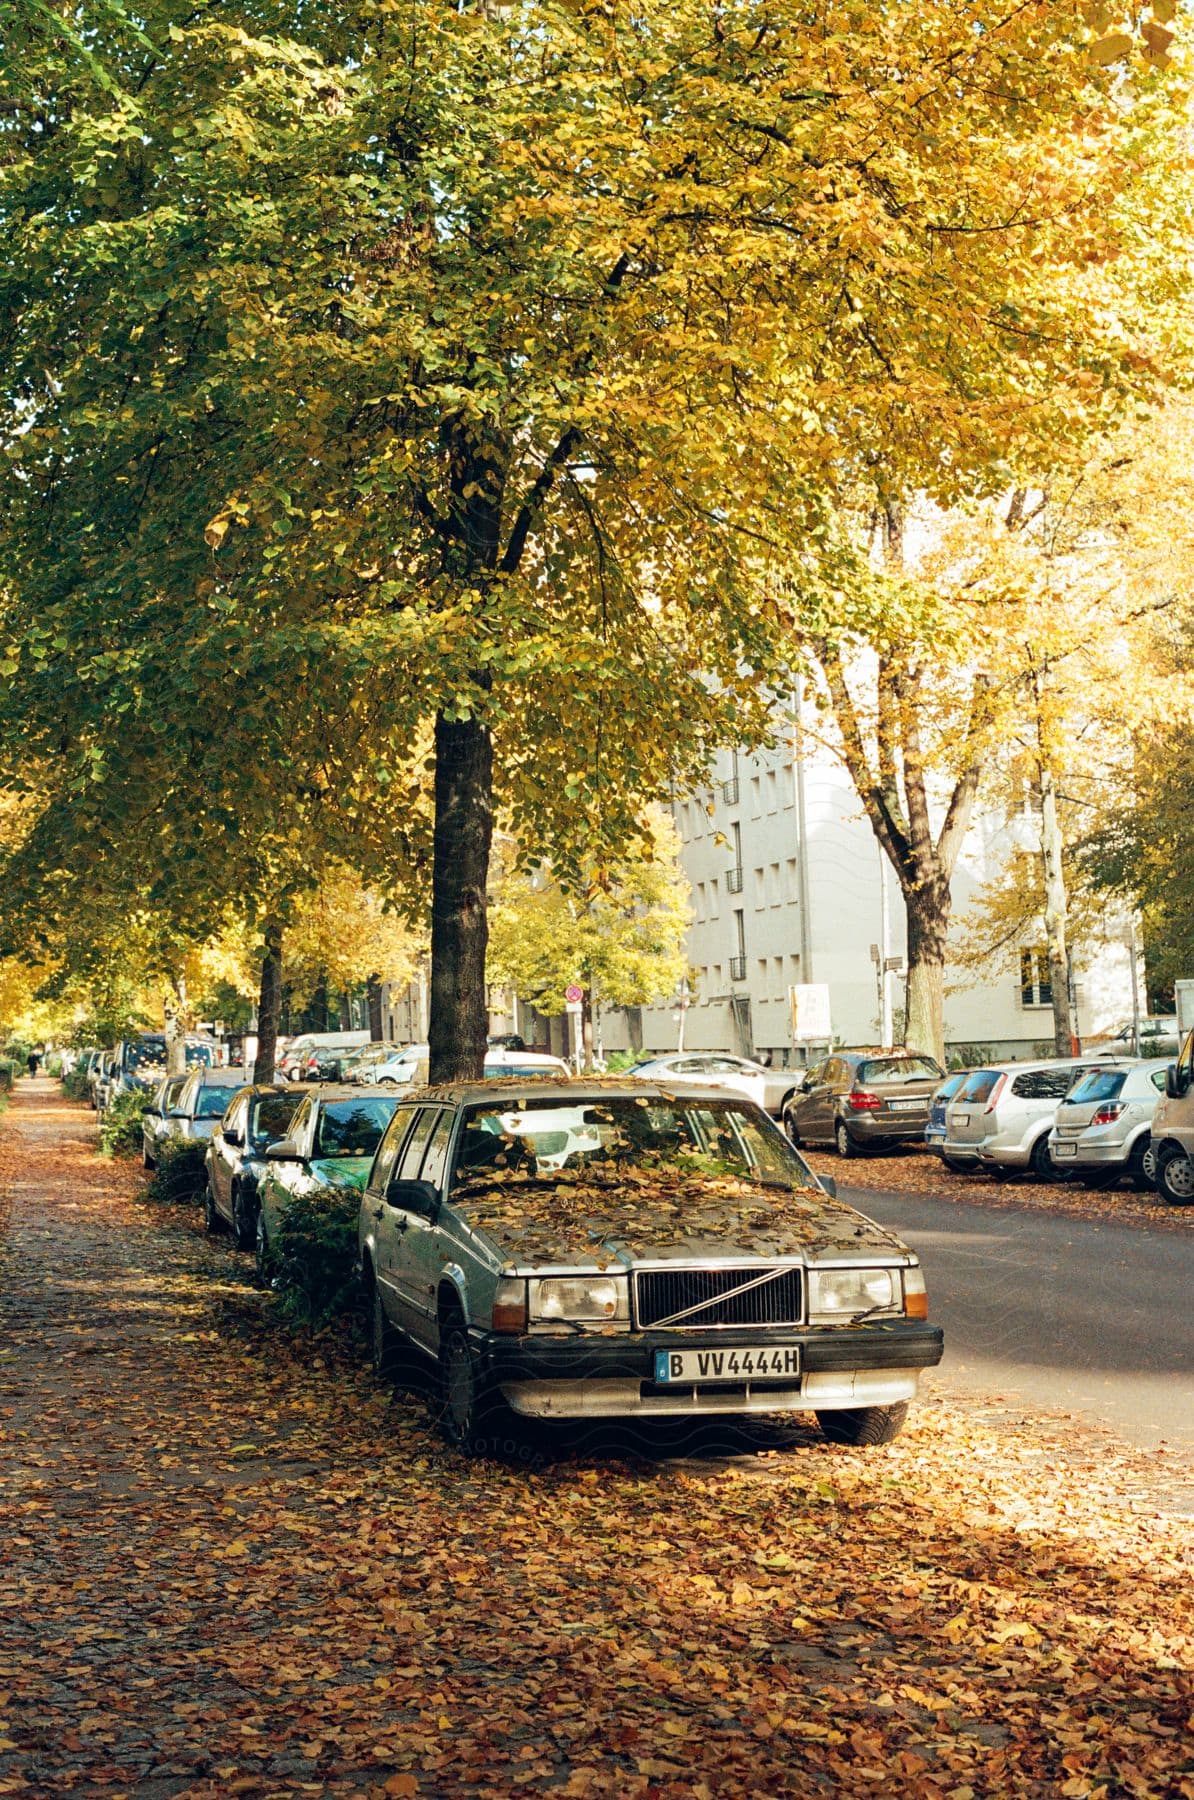 A serene autumn scene on a city street, where an old car is parked on the sidewalk, surrounded by trees with yellow and gold leaves.